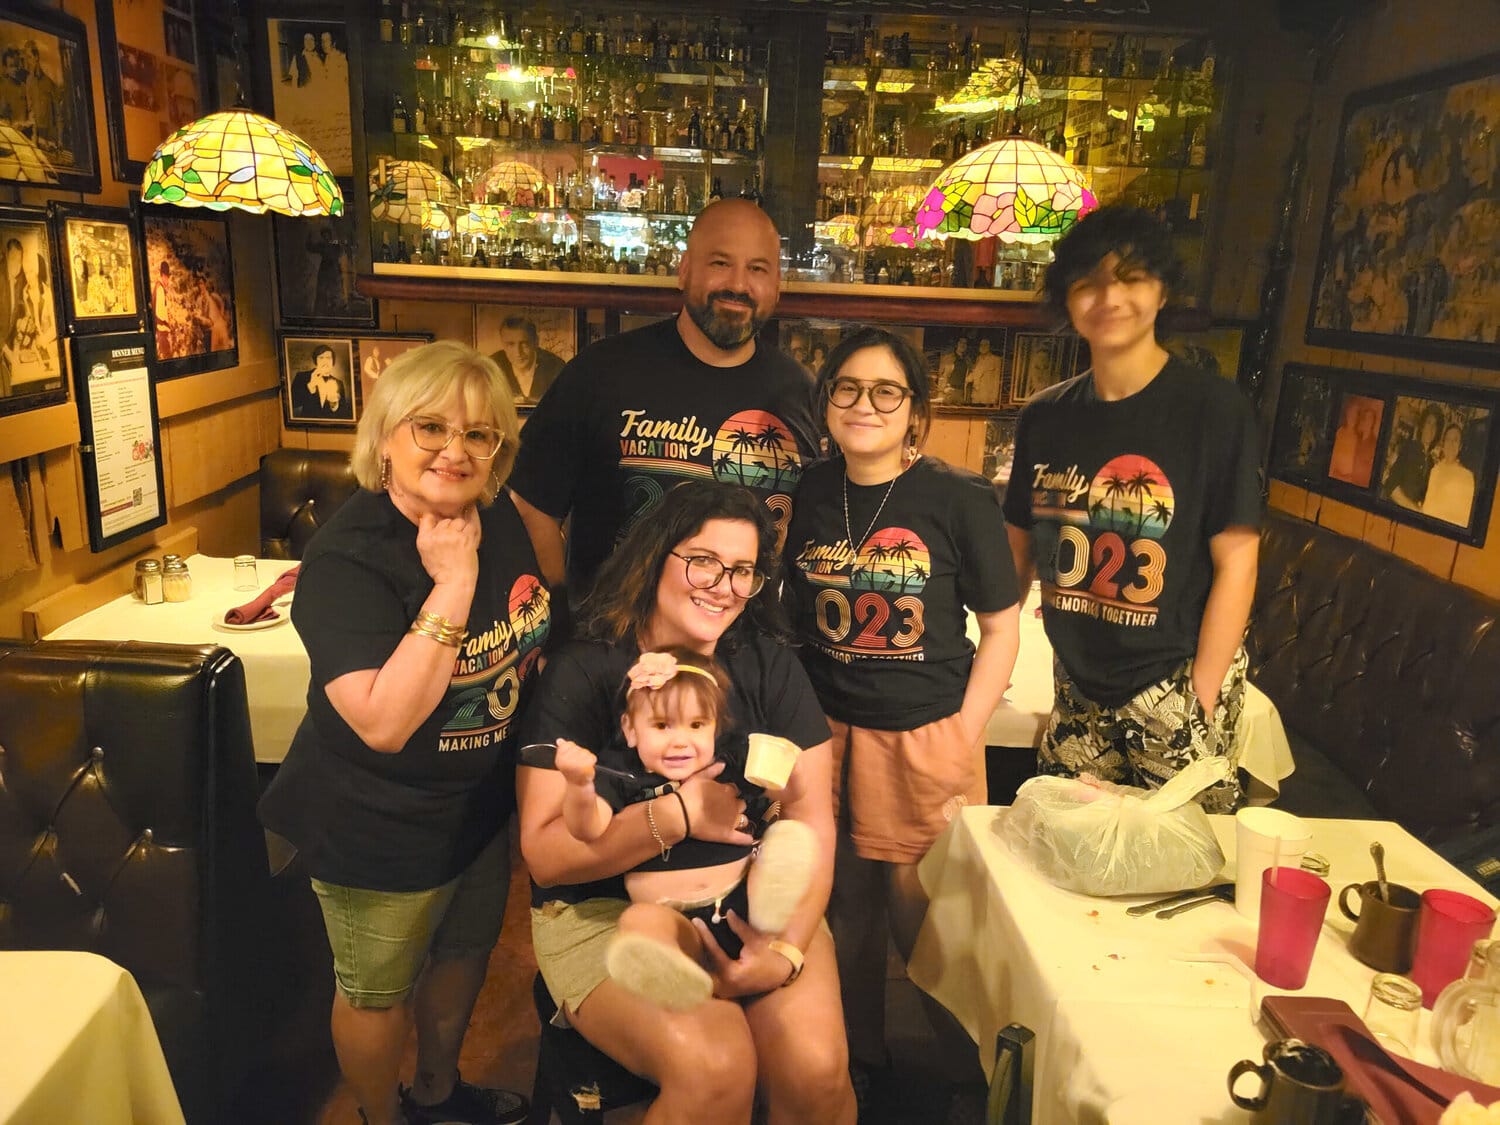 a happy family posing for a group picture inside a restaurant